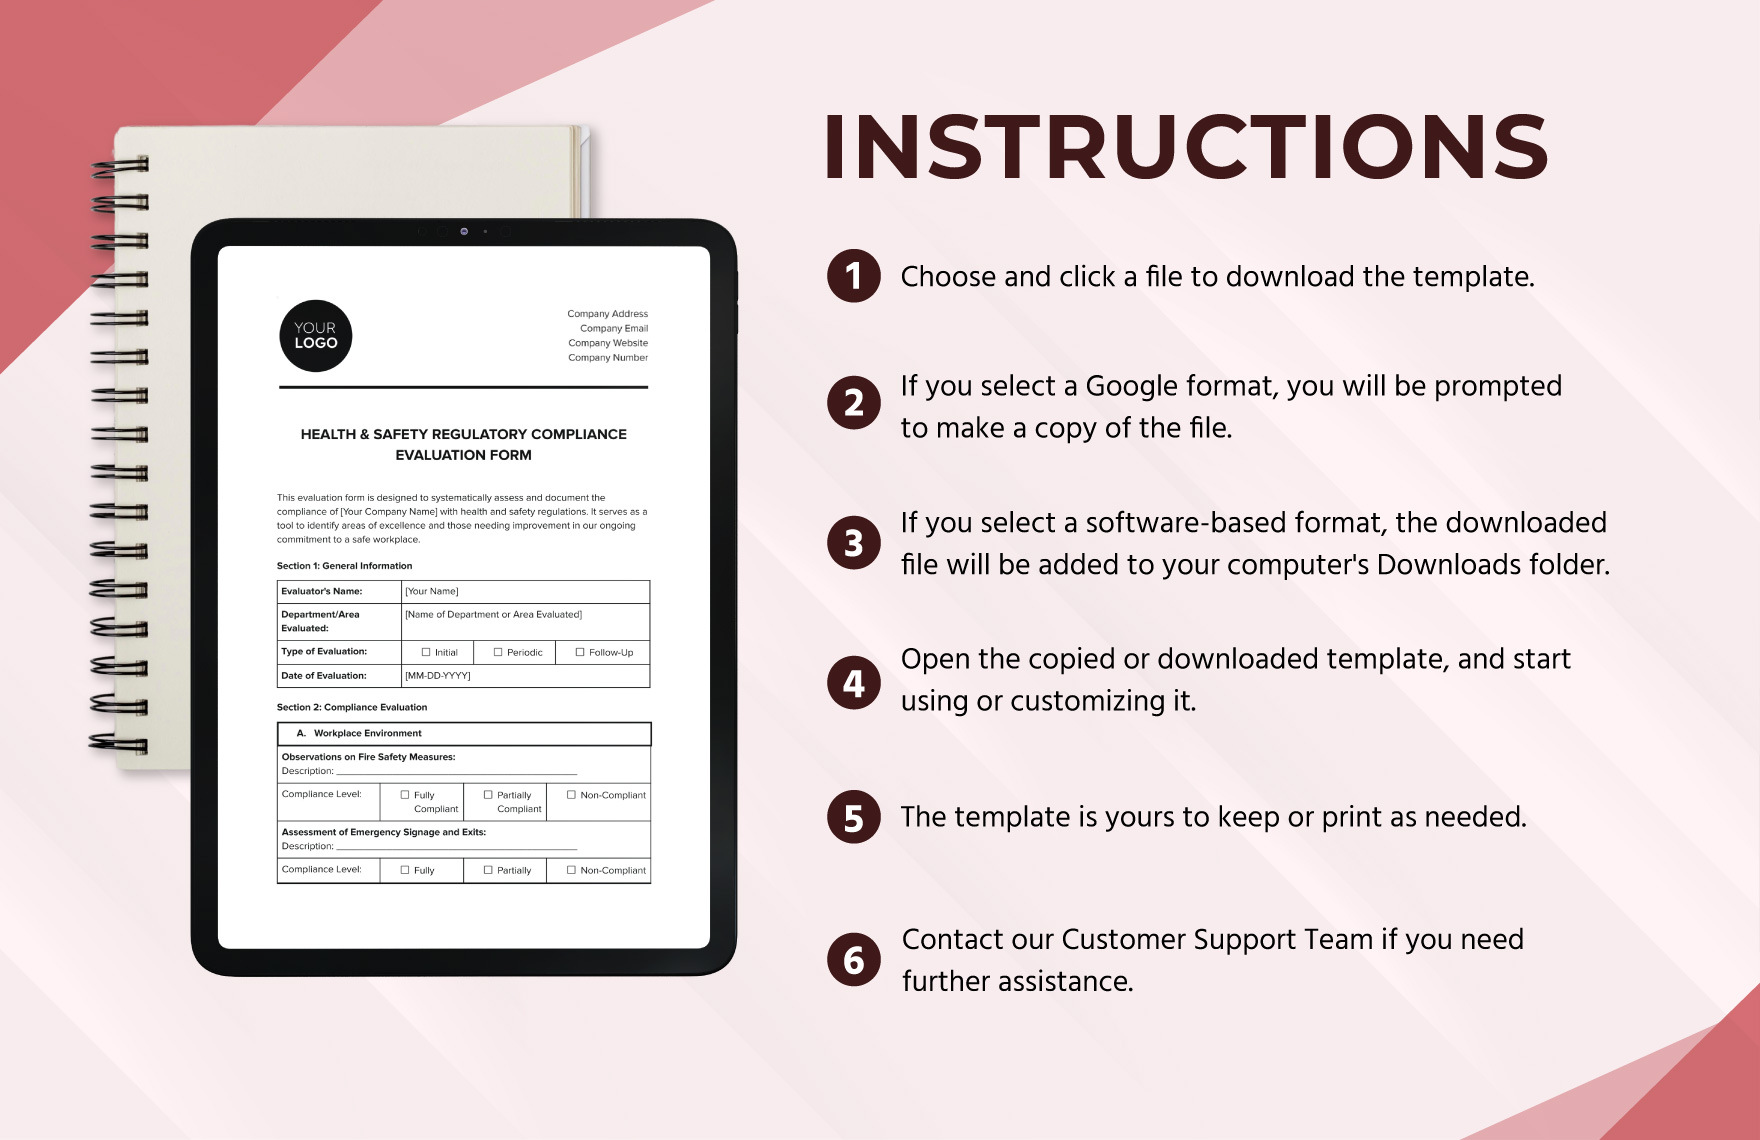 Health & Safety Regulatory Compliance Evaluation Form Template